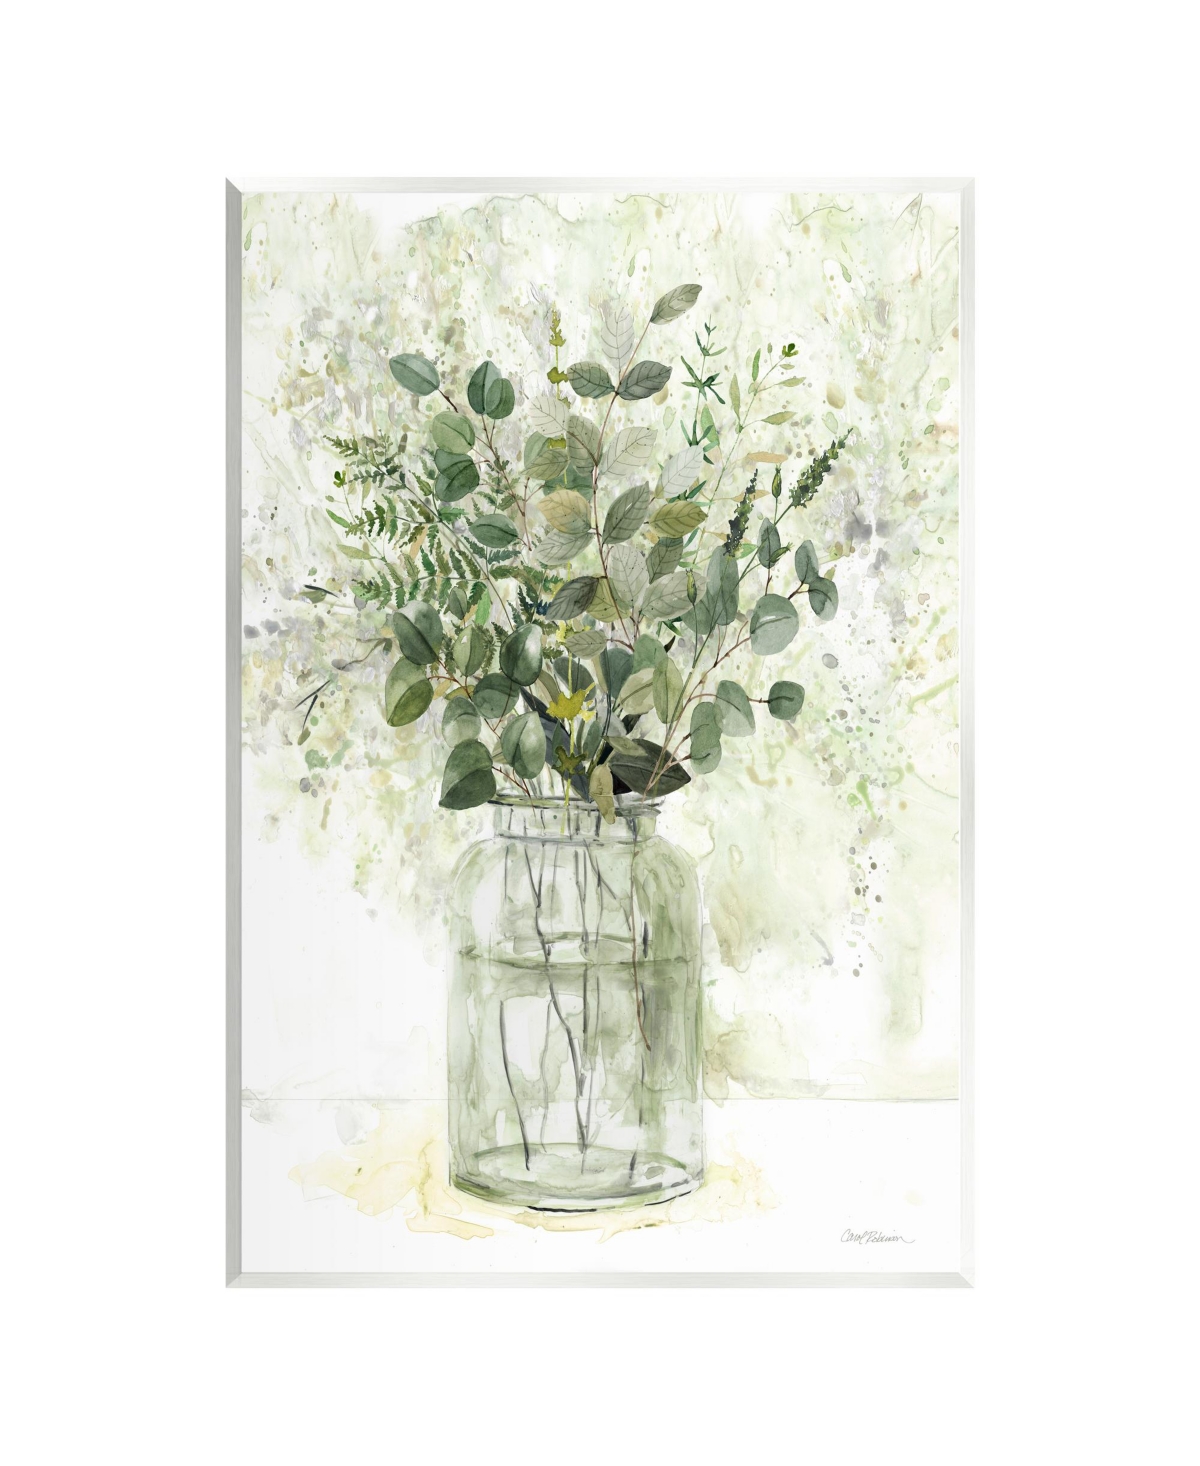 Stupell Industries Herbal Botanical Arrangement Wall Plaque Art, 13" X 19" In Multi-color